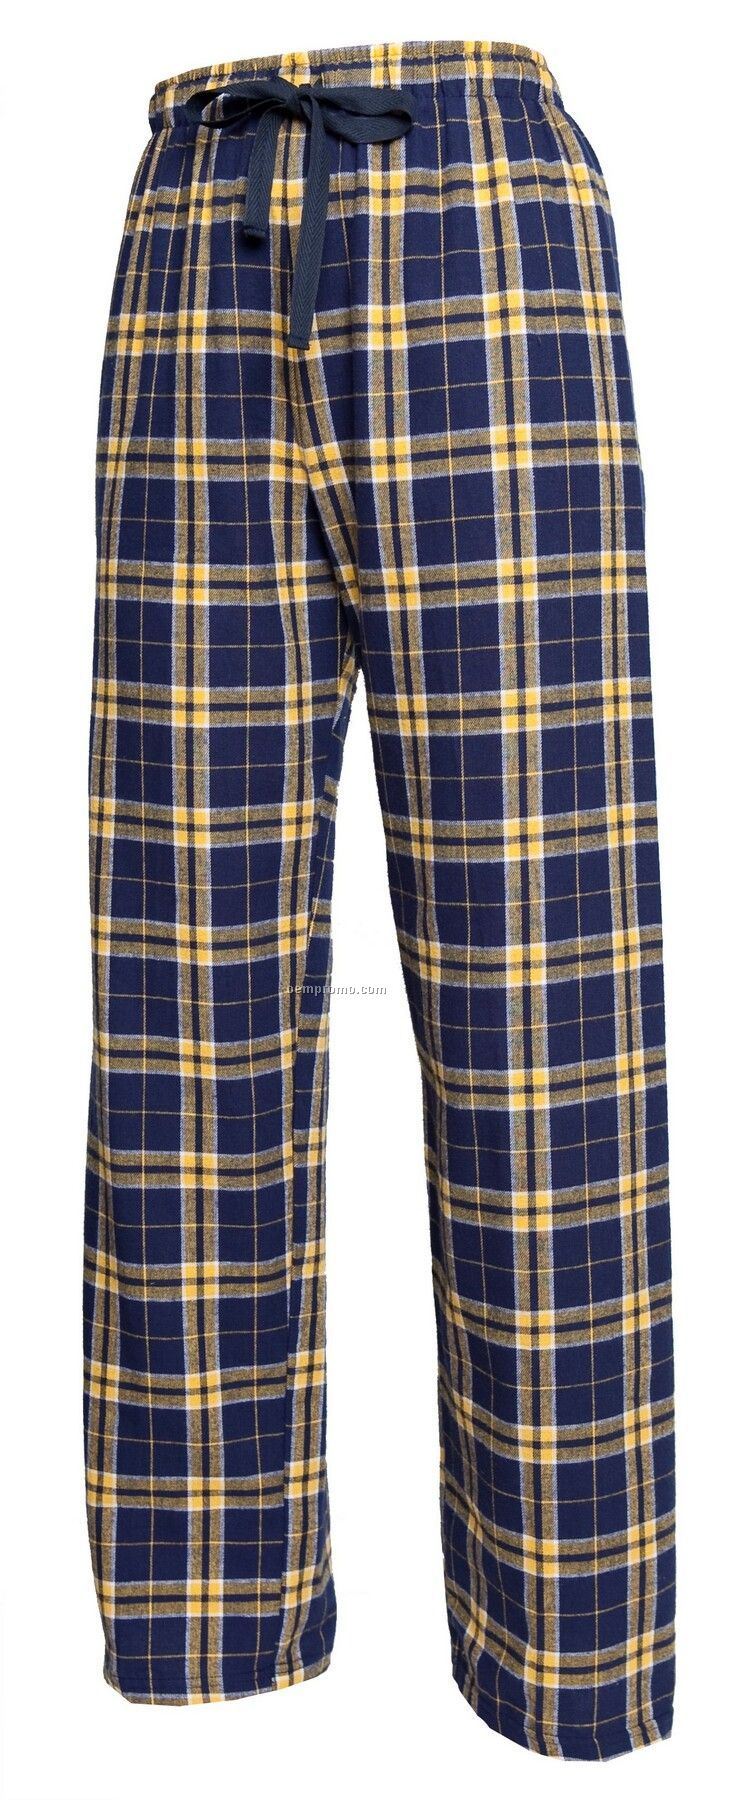 Adult Team Pride Flannel Pant In Navy Blue & Gold Plaid